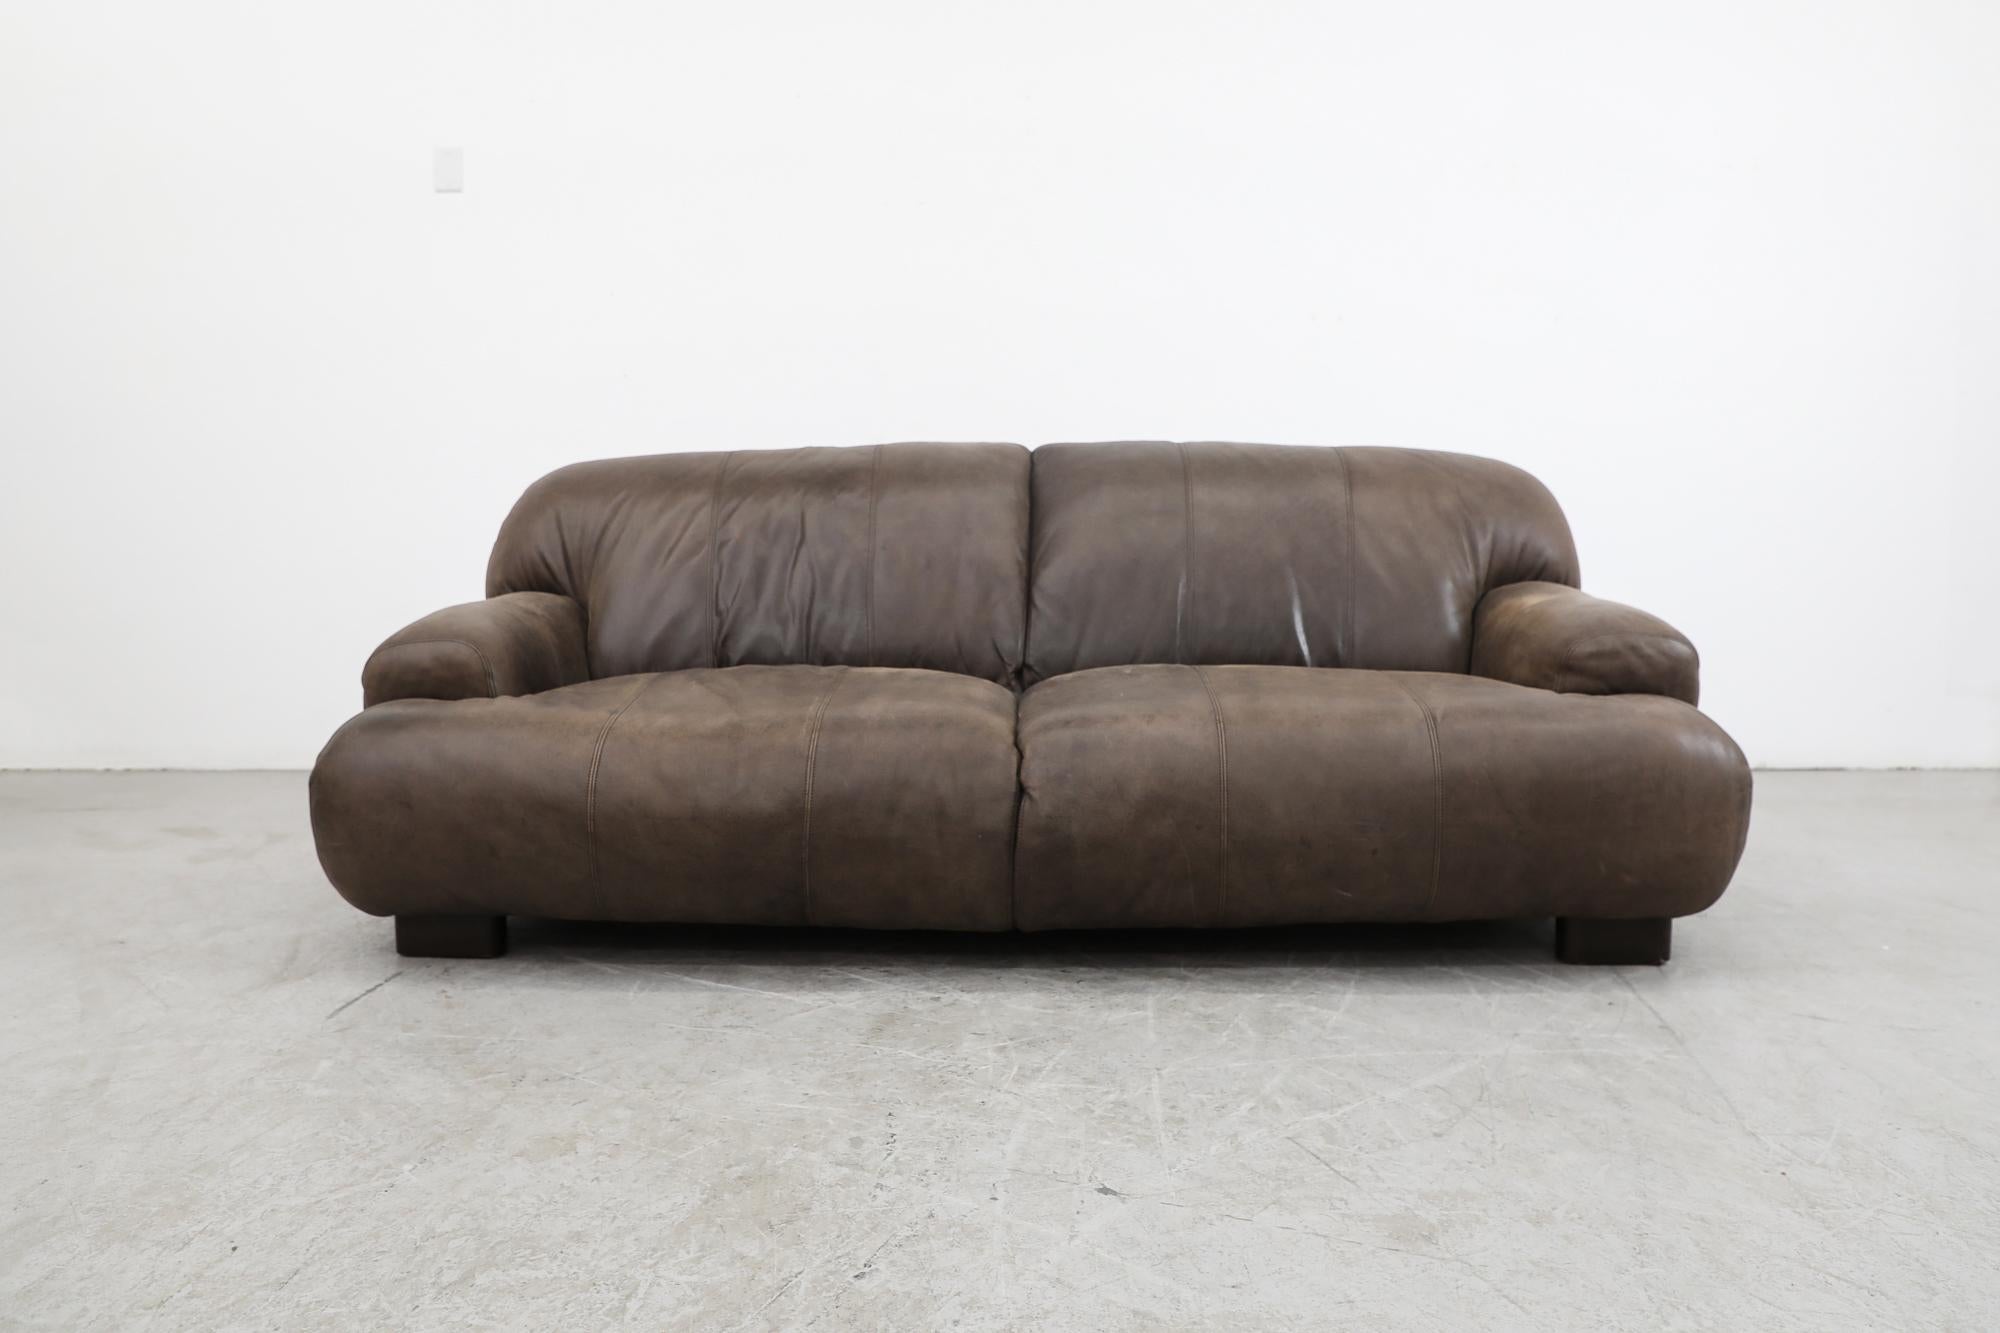 Mid-century De Sede style super stuffed brown leather sofa with deep seating, rounded lines and small arm rests. In original condition with a great patina and fading to the leather, consistent with its age and use. Other leather sofas are available